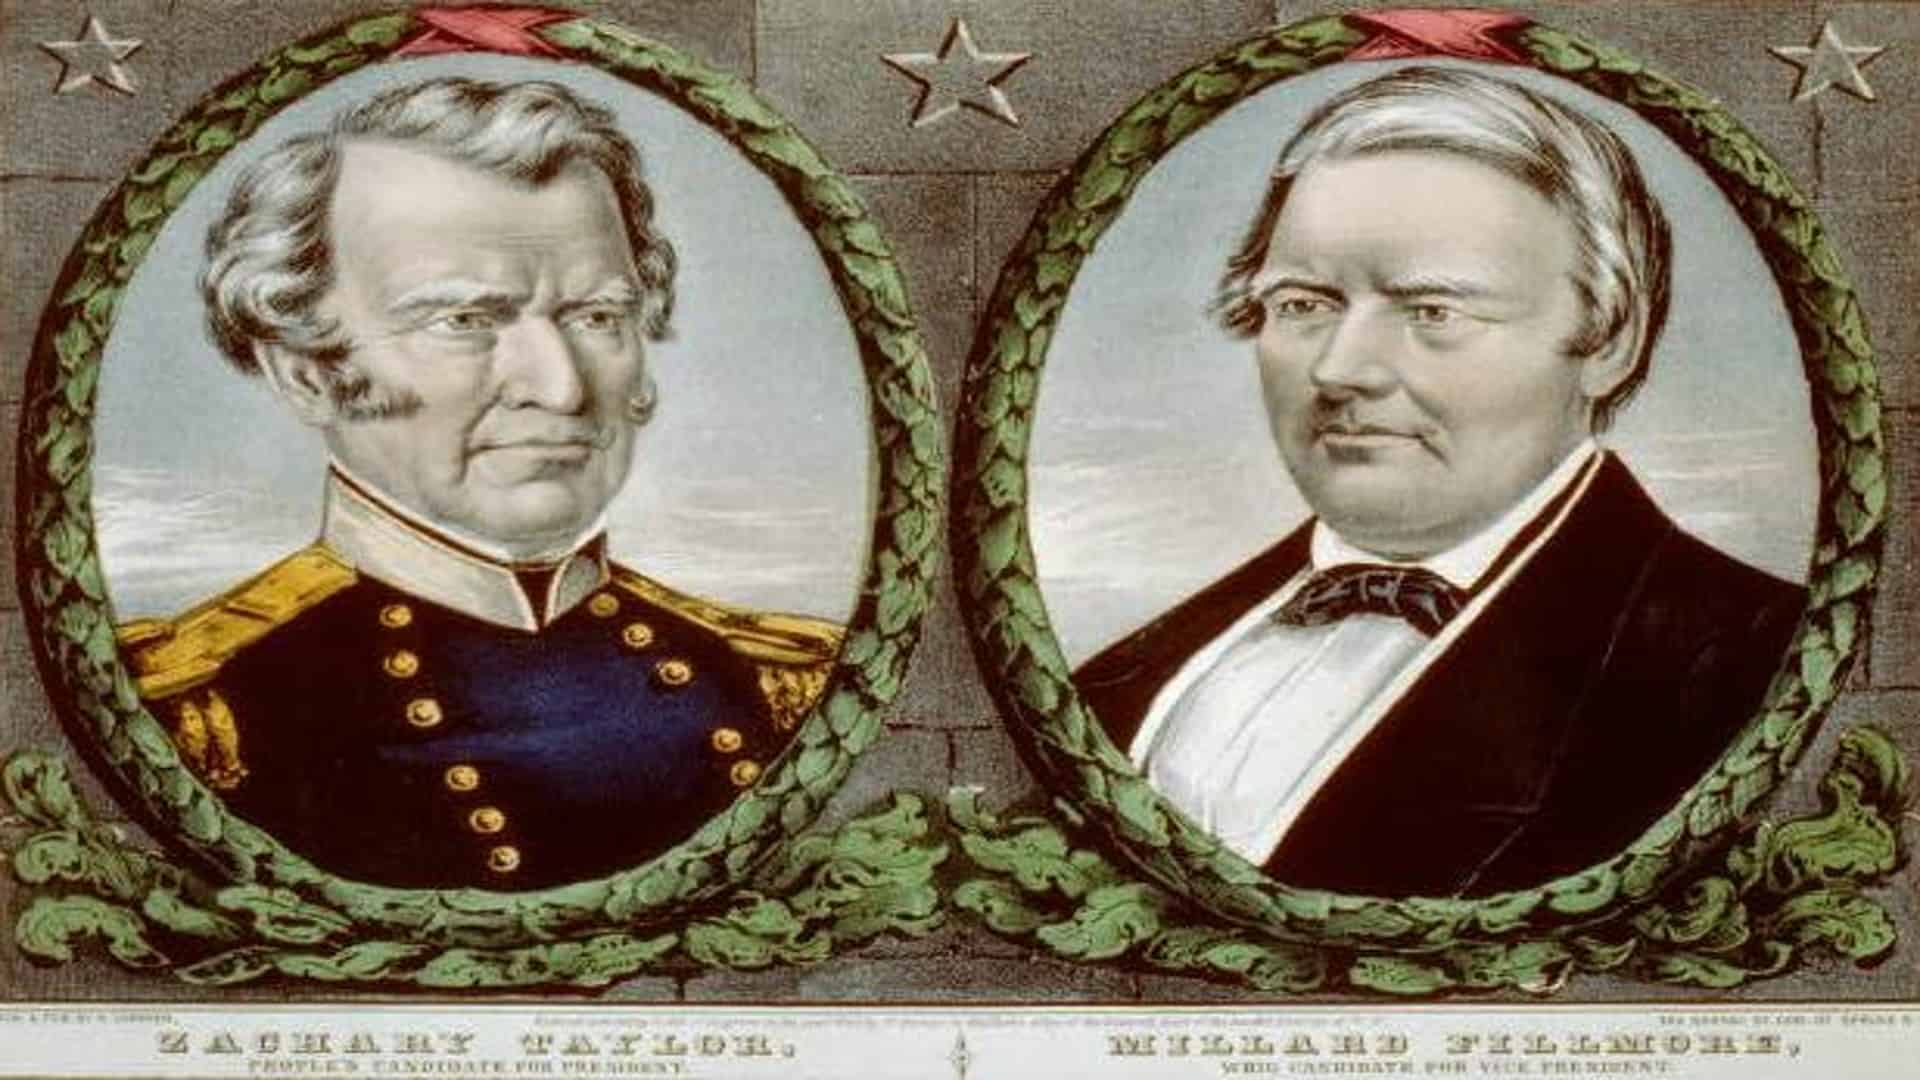 Zachary Taylor(left) in a campaign poster